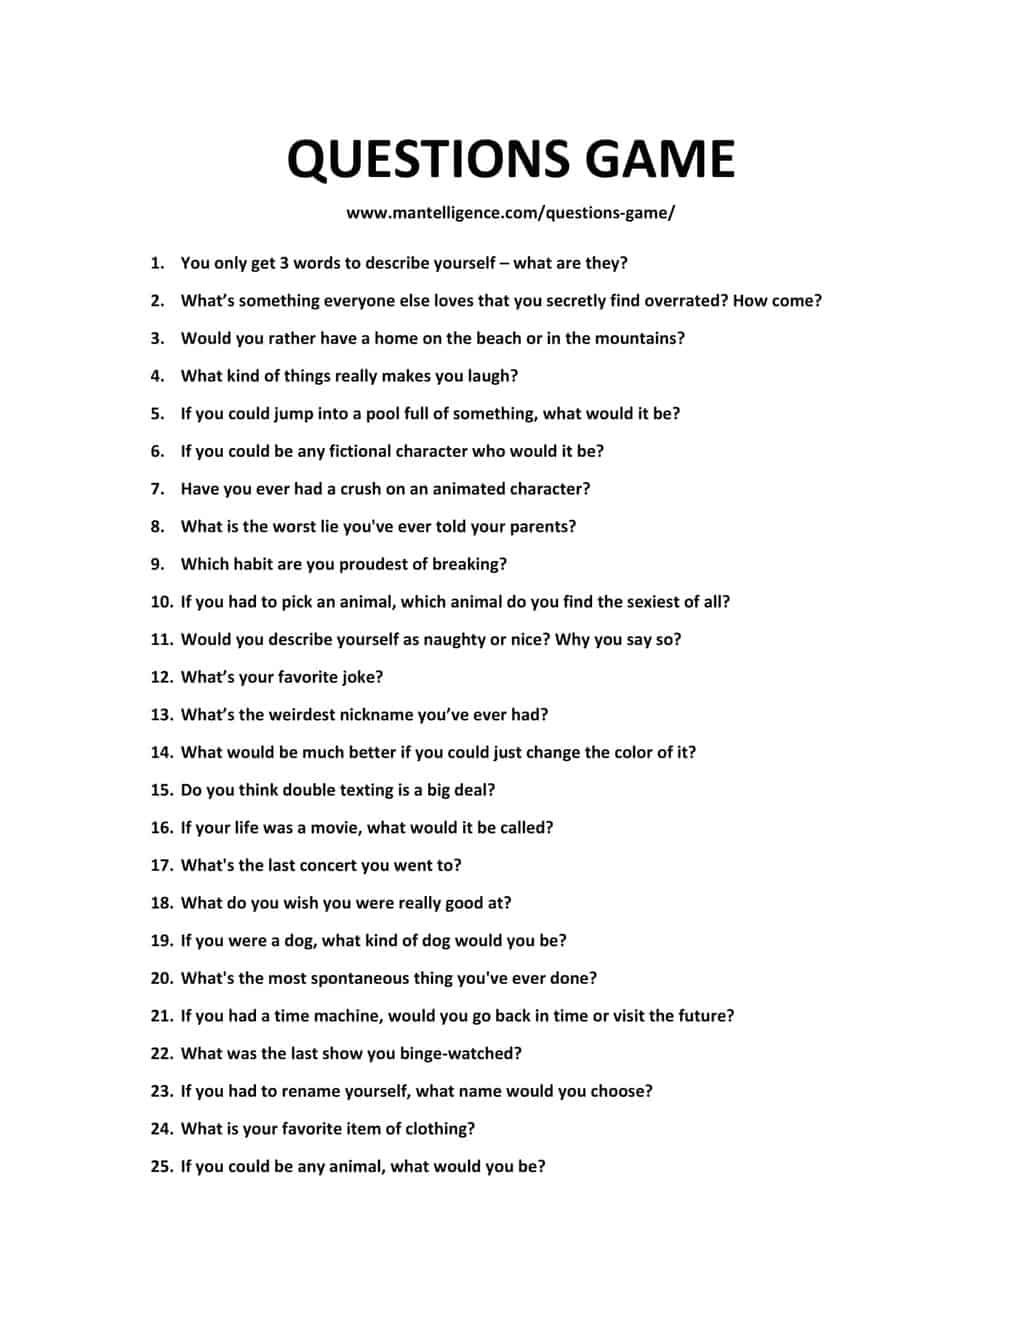 LIST OF QUESTIONS GAME 1 